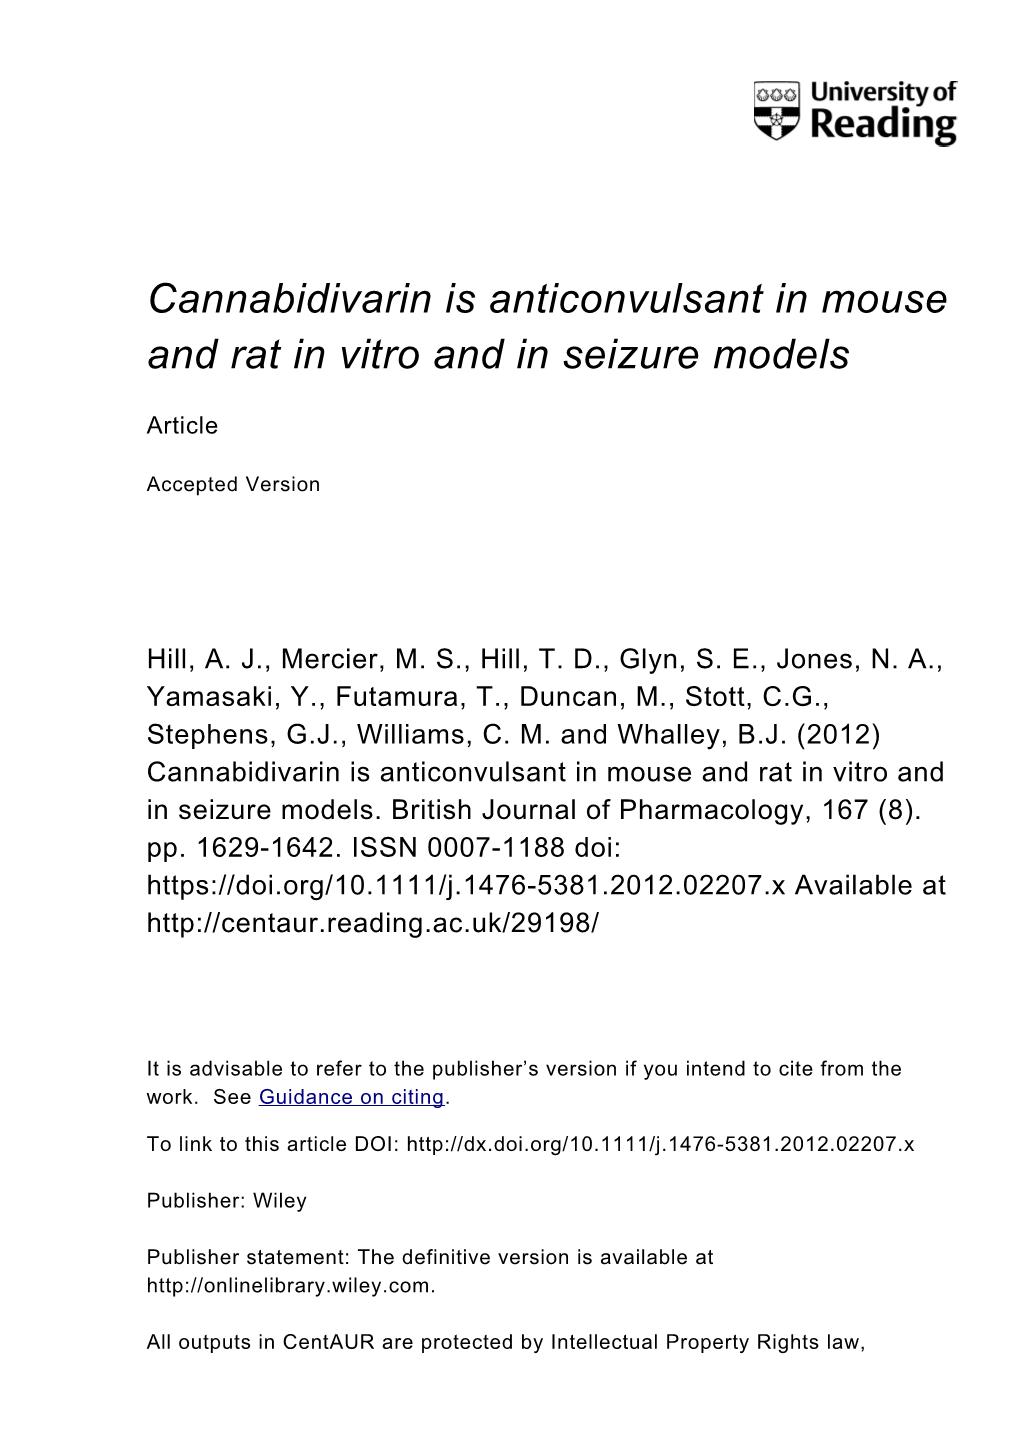 Cannabidivarin Is Anticonvulsant in Mouse and Rat in Vitro and in Seizure Models